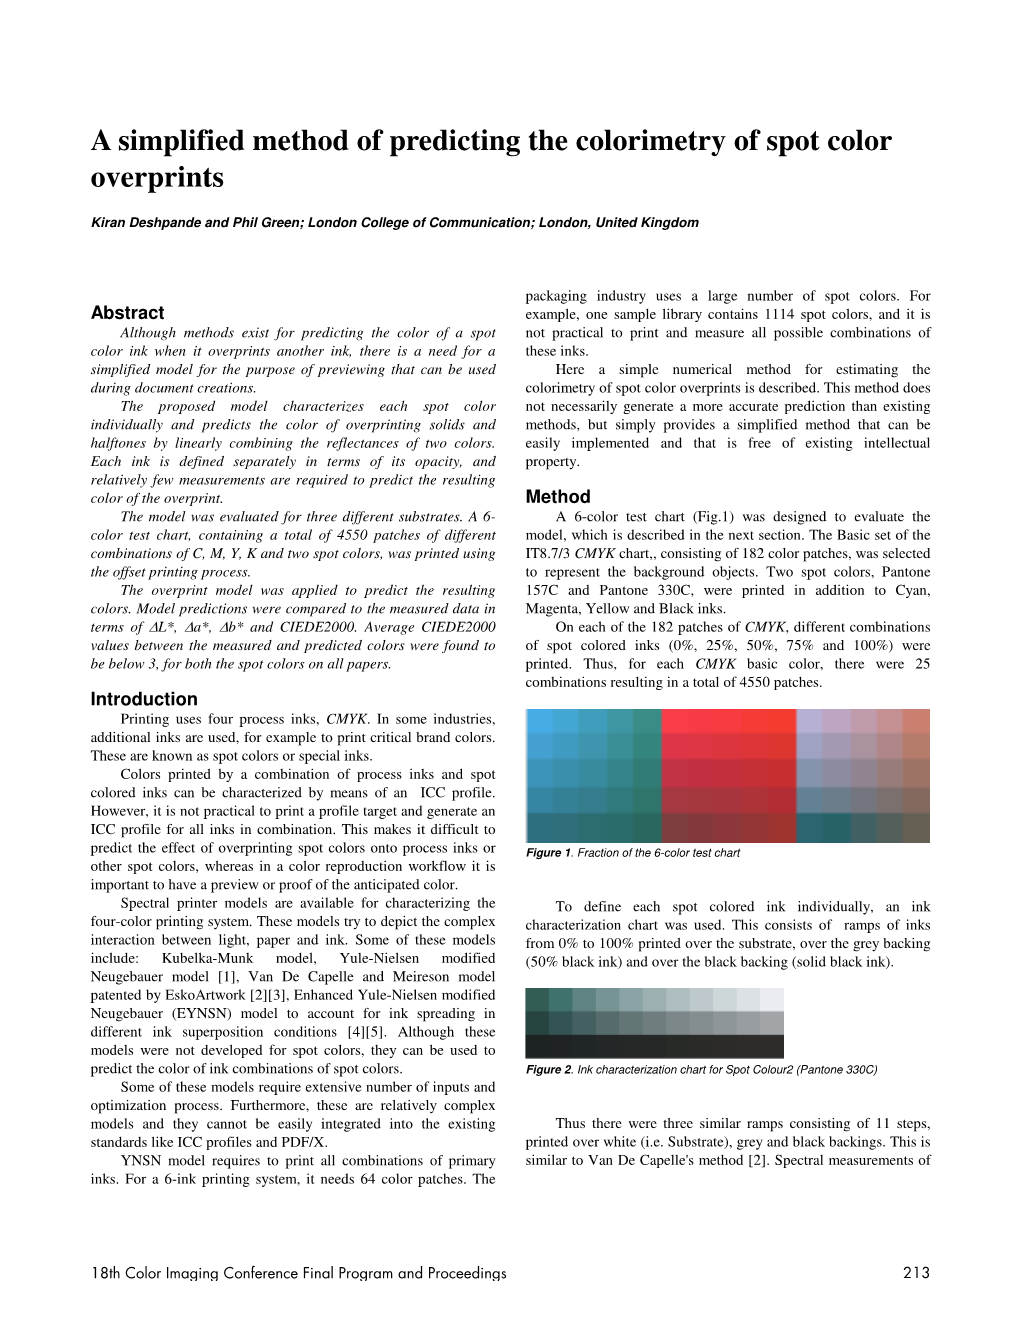 A Simplified Method of Predicting the Colorimetry of Spot Color Overprints